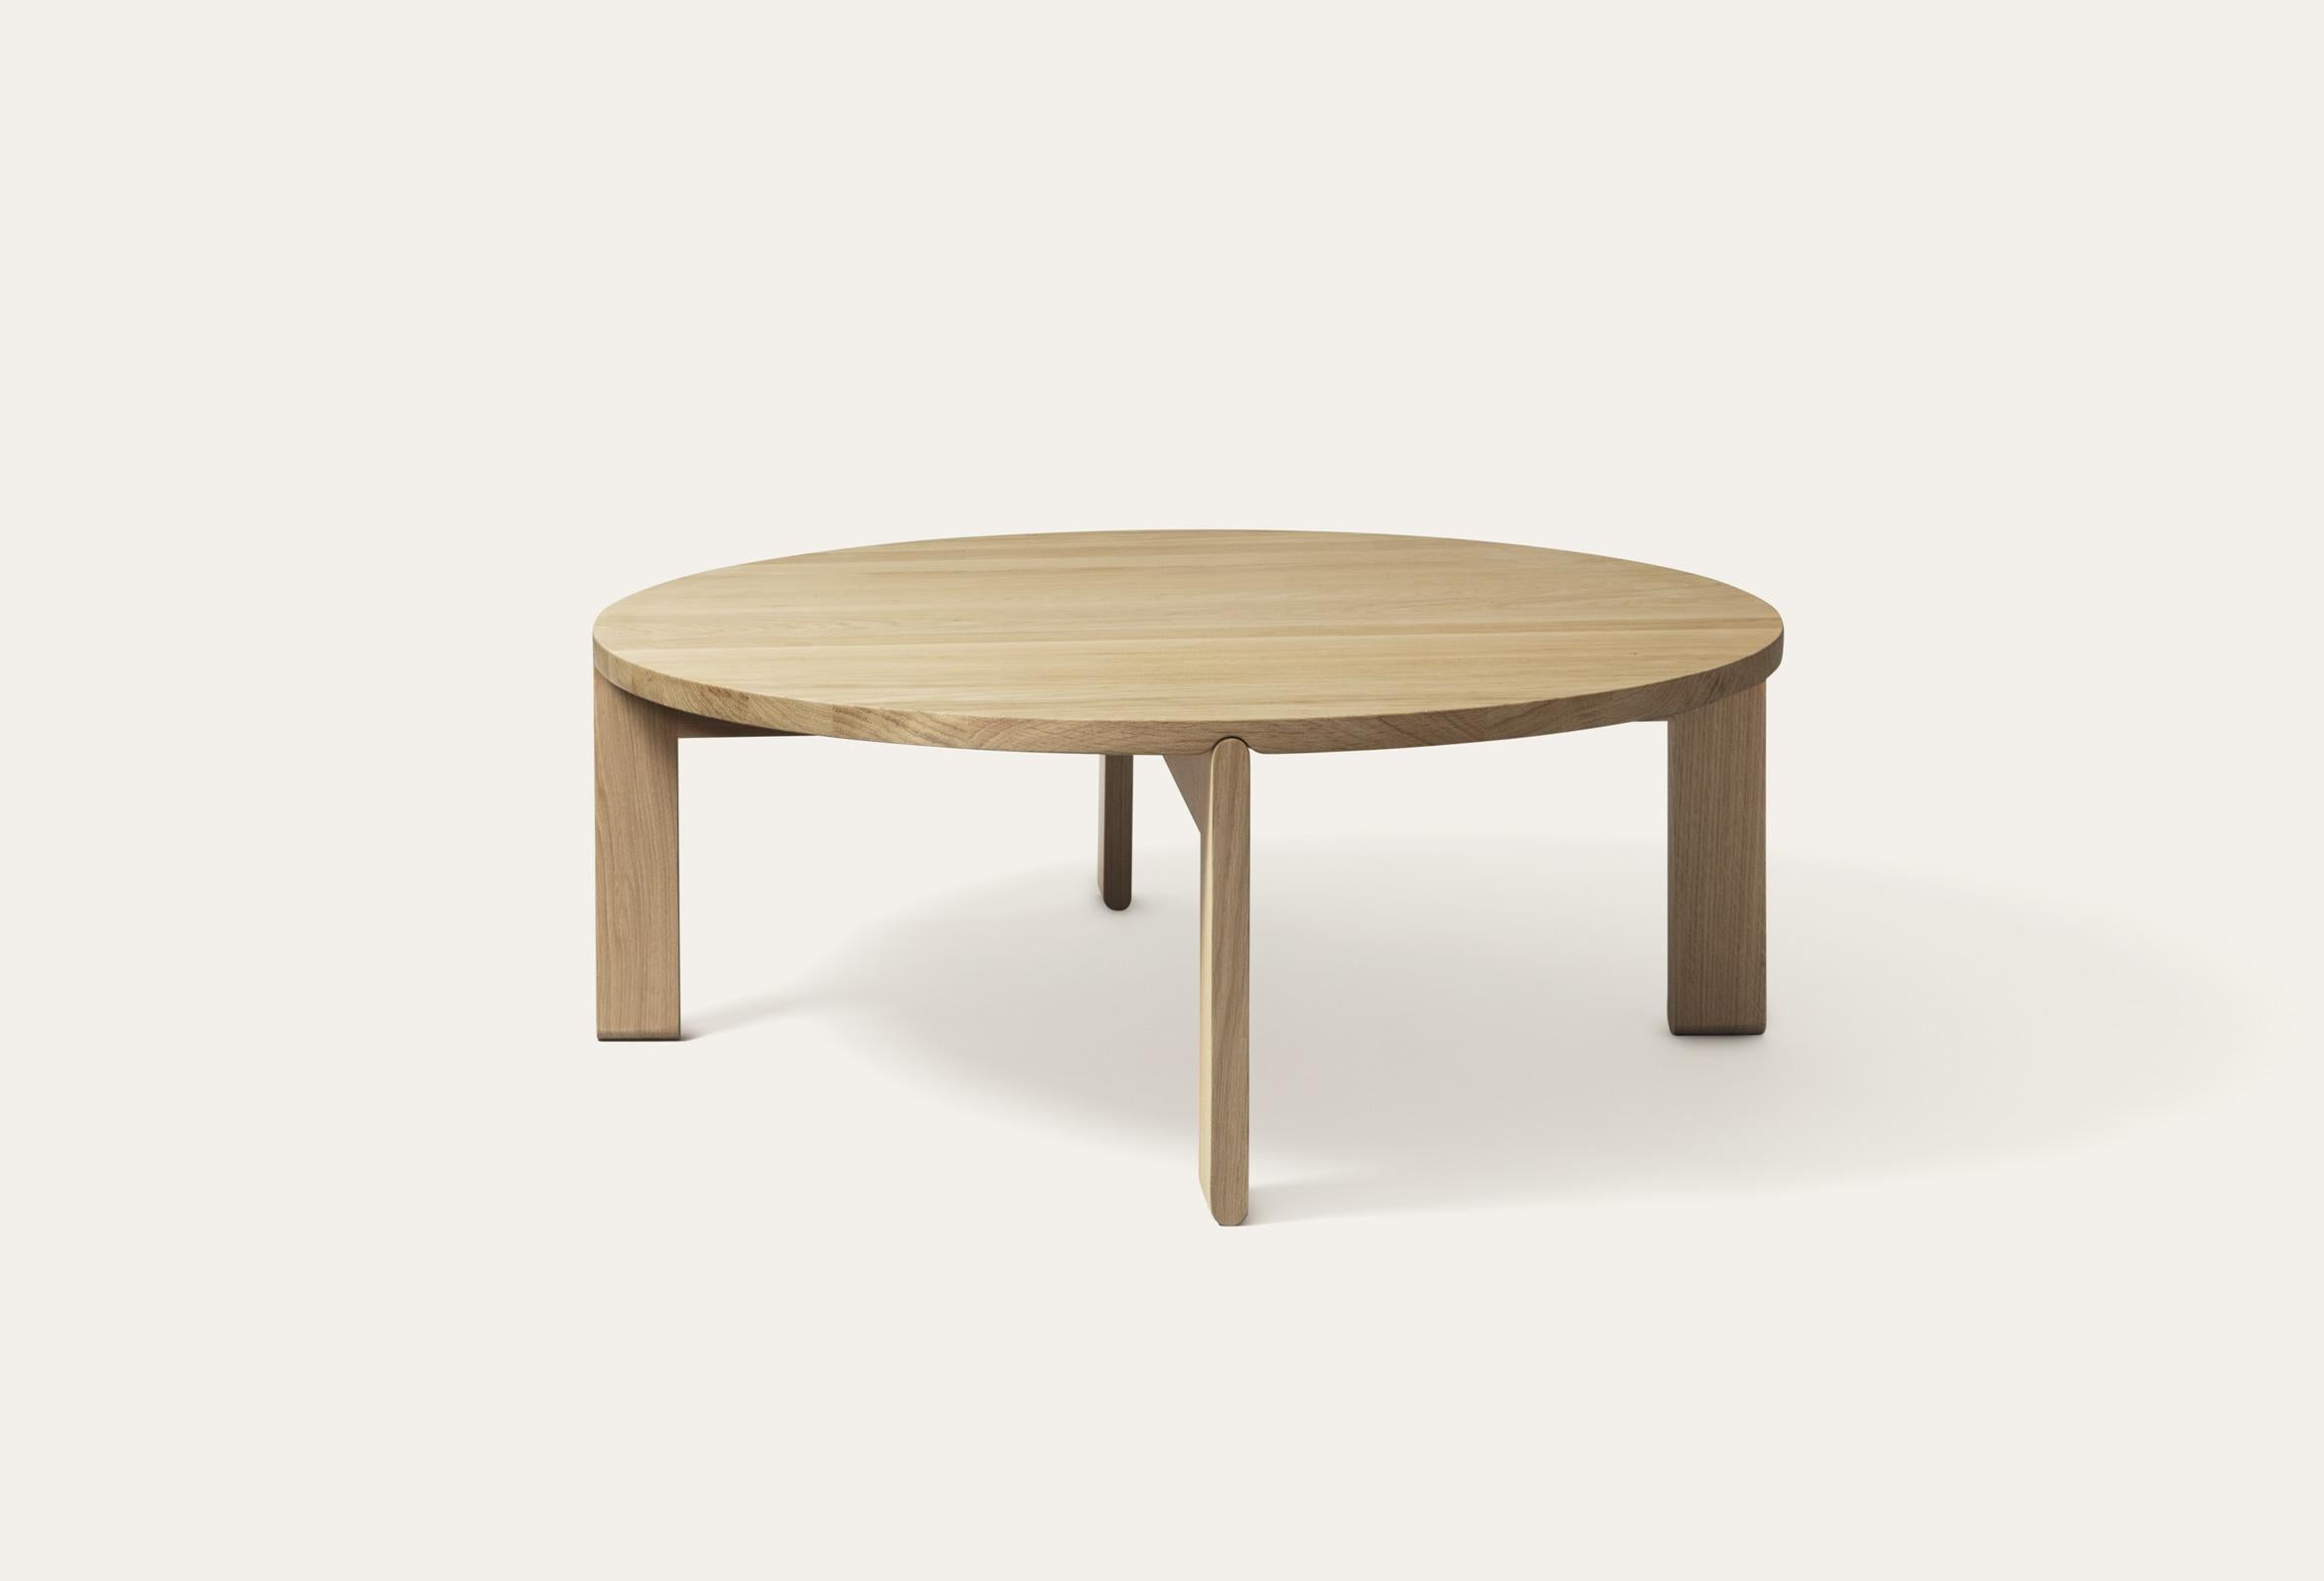 Large Rond Coffee Table by Storängen Design
Dimensions: D 100 x H 38 cm
Materials: oak wood.
Available in other colors and 2 sizes: D100cm, D75cm.

Rond is a coffee table made of solid oak. The different diameters and heights create many